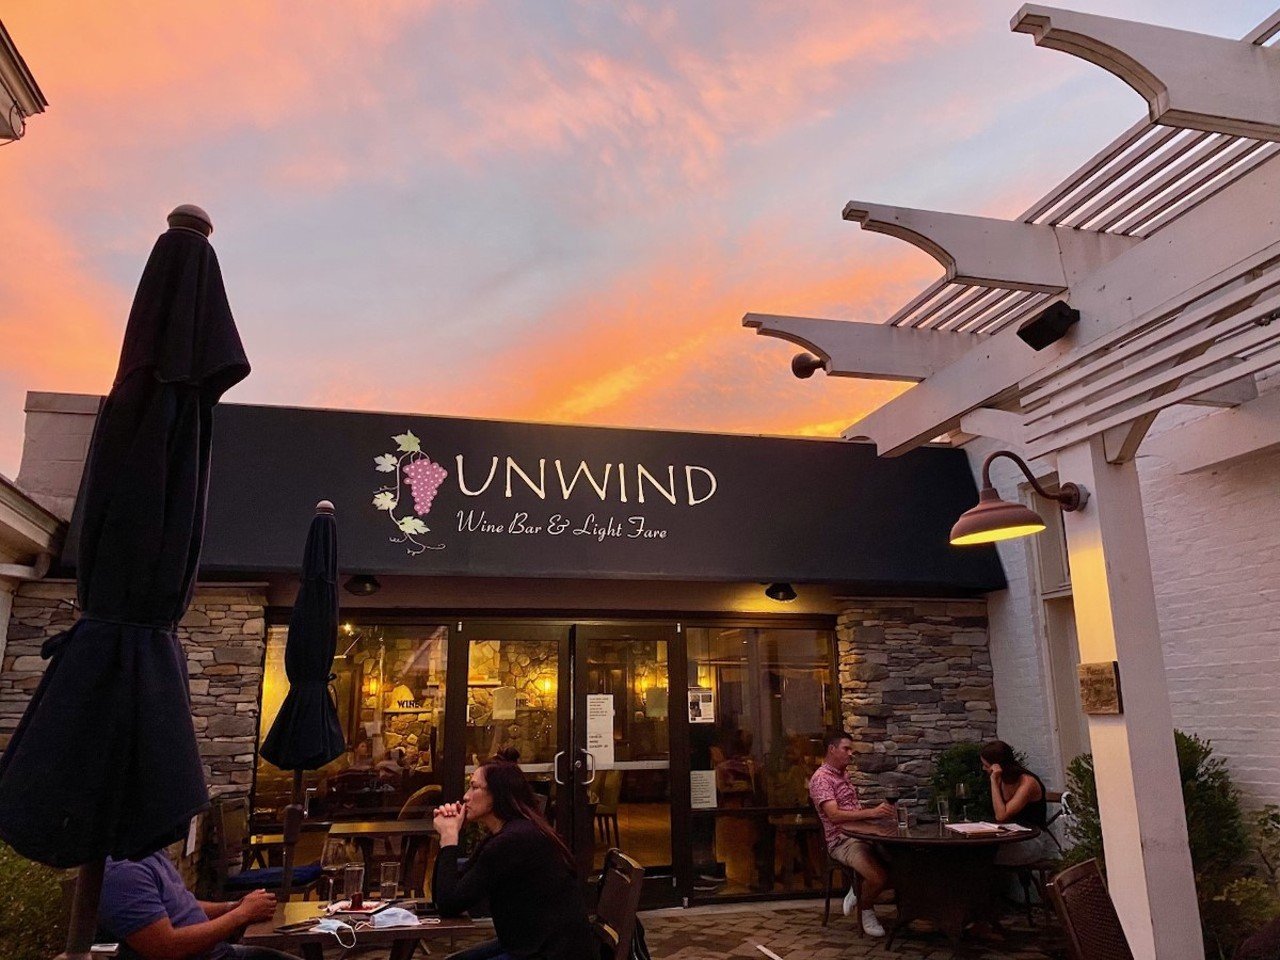 Unwind Wine Bar
3435 Michigan Ave., Hyde Park
Cozy and rustic, but still upscale, is the vibe at Unwind Wine Bar. It’s hard not to feel relaxed when you’re in front of their fireplace or on their Tuscan-like patio, so it only makes sense to include Unwind in your after-work happy hour rotation. You can get $5 off all wine bottles and $2 off 6-ounce wine glass wine pours from 4-7 p.m. Tuesday through Friday.